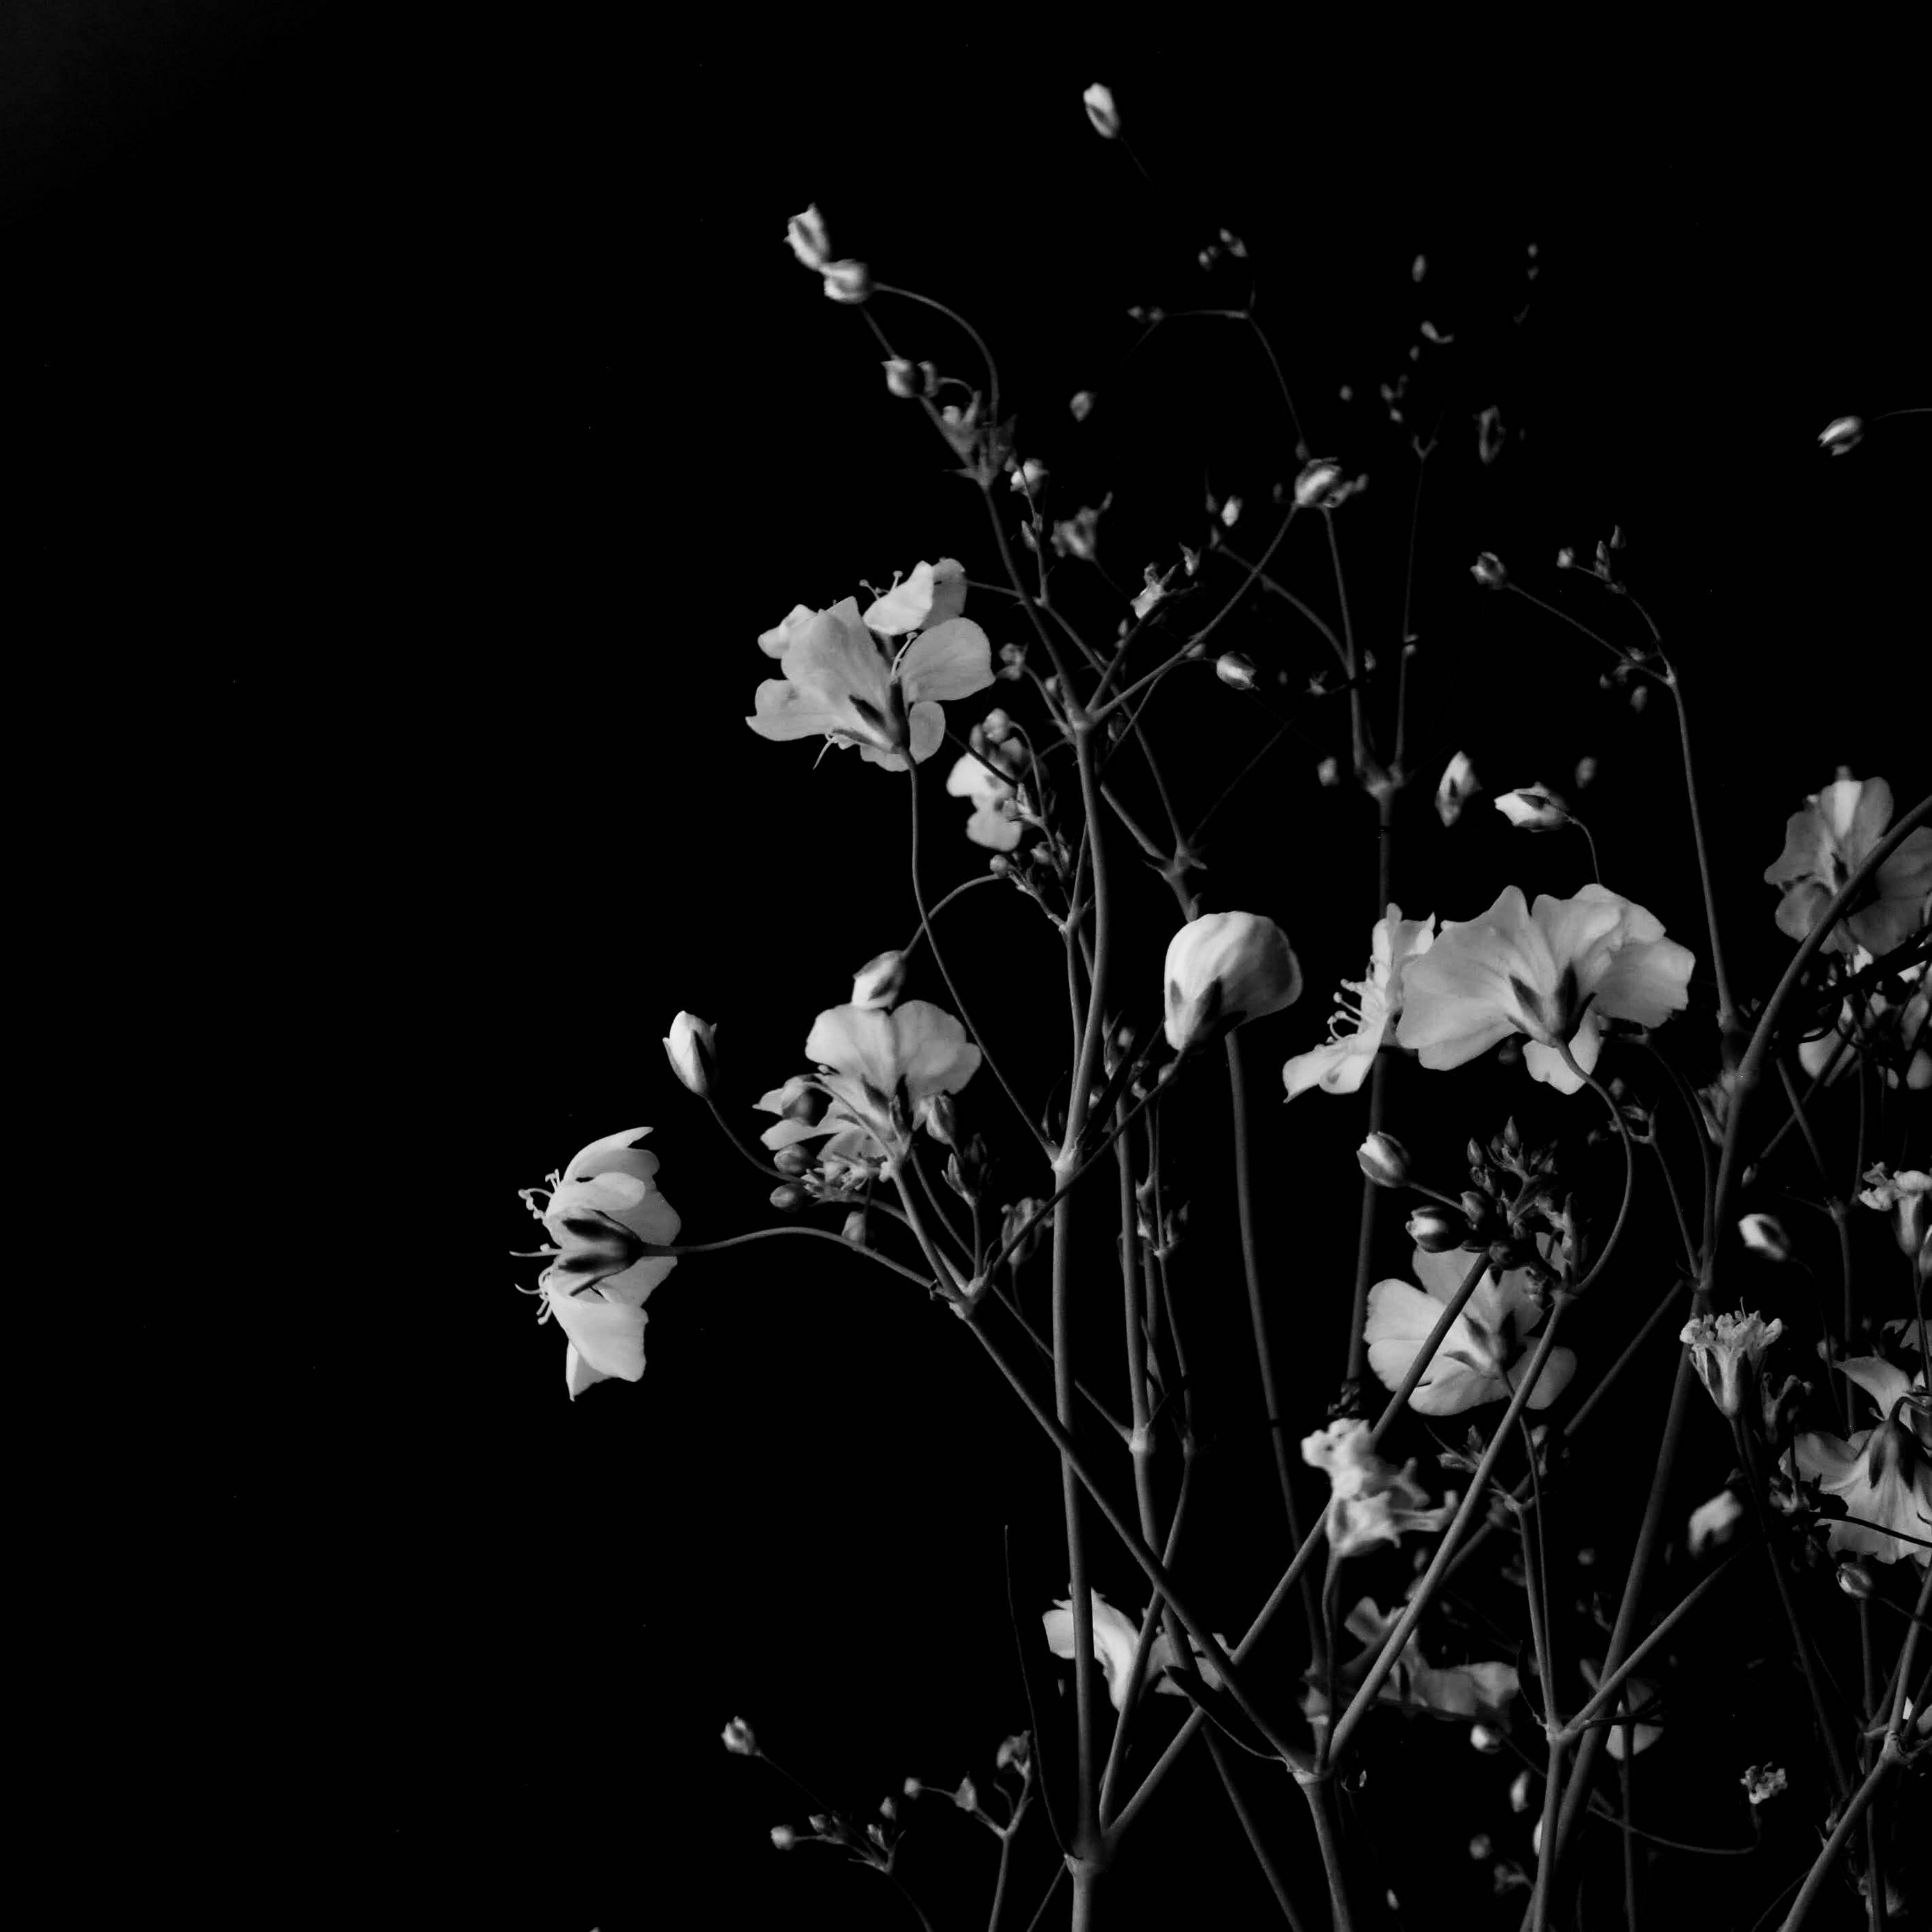 Download wallpaper 2780x2780 flowers, branches, black and white, black ipad air, ipad air ipad ipad ipad mini ipad mini ipad mini ipad pro 9.7 for parallax HD background